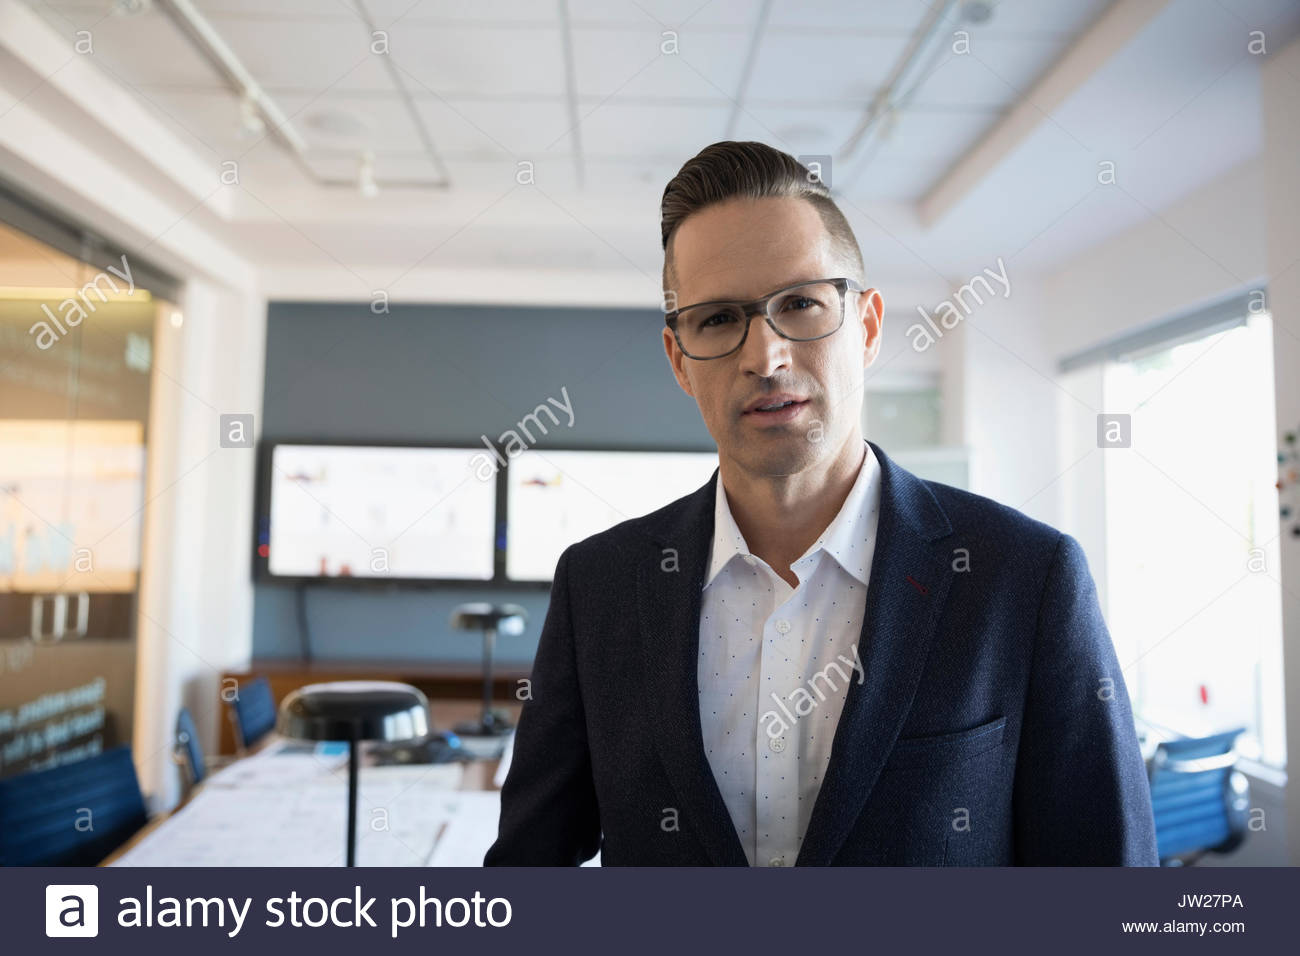 Portrait confident businessman in conference room Stock Photo